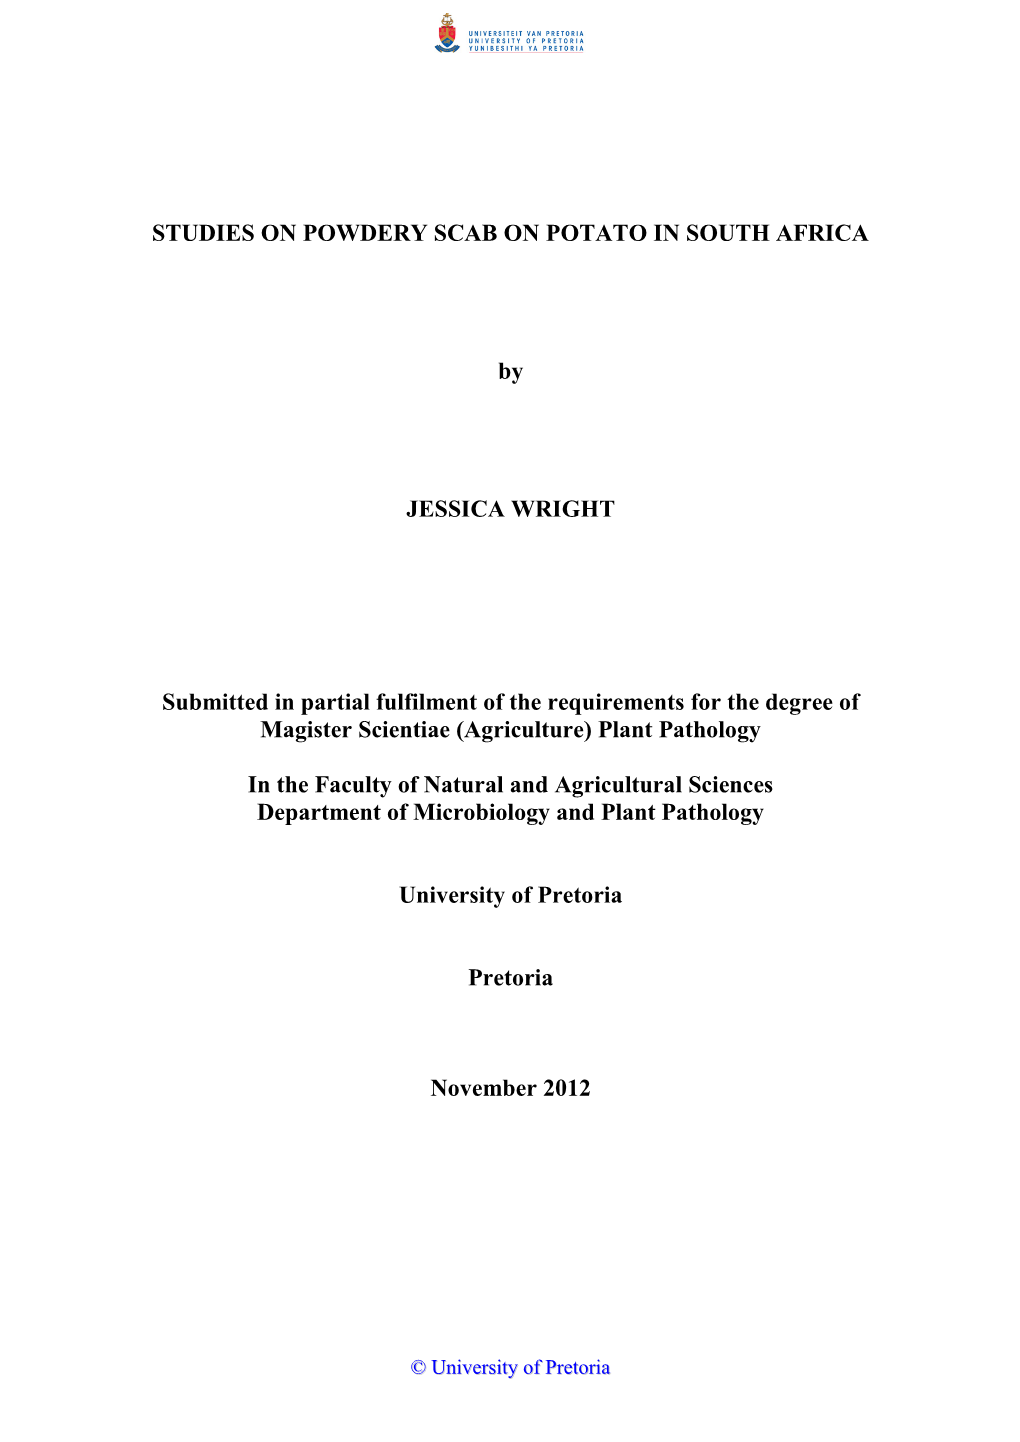 STUDIES on POWDERY SCAB on POTATO in SOUTH AFRICA By